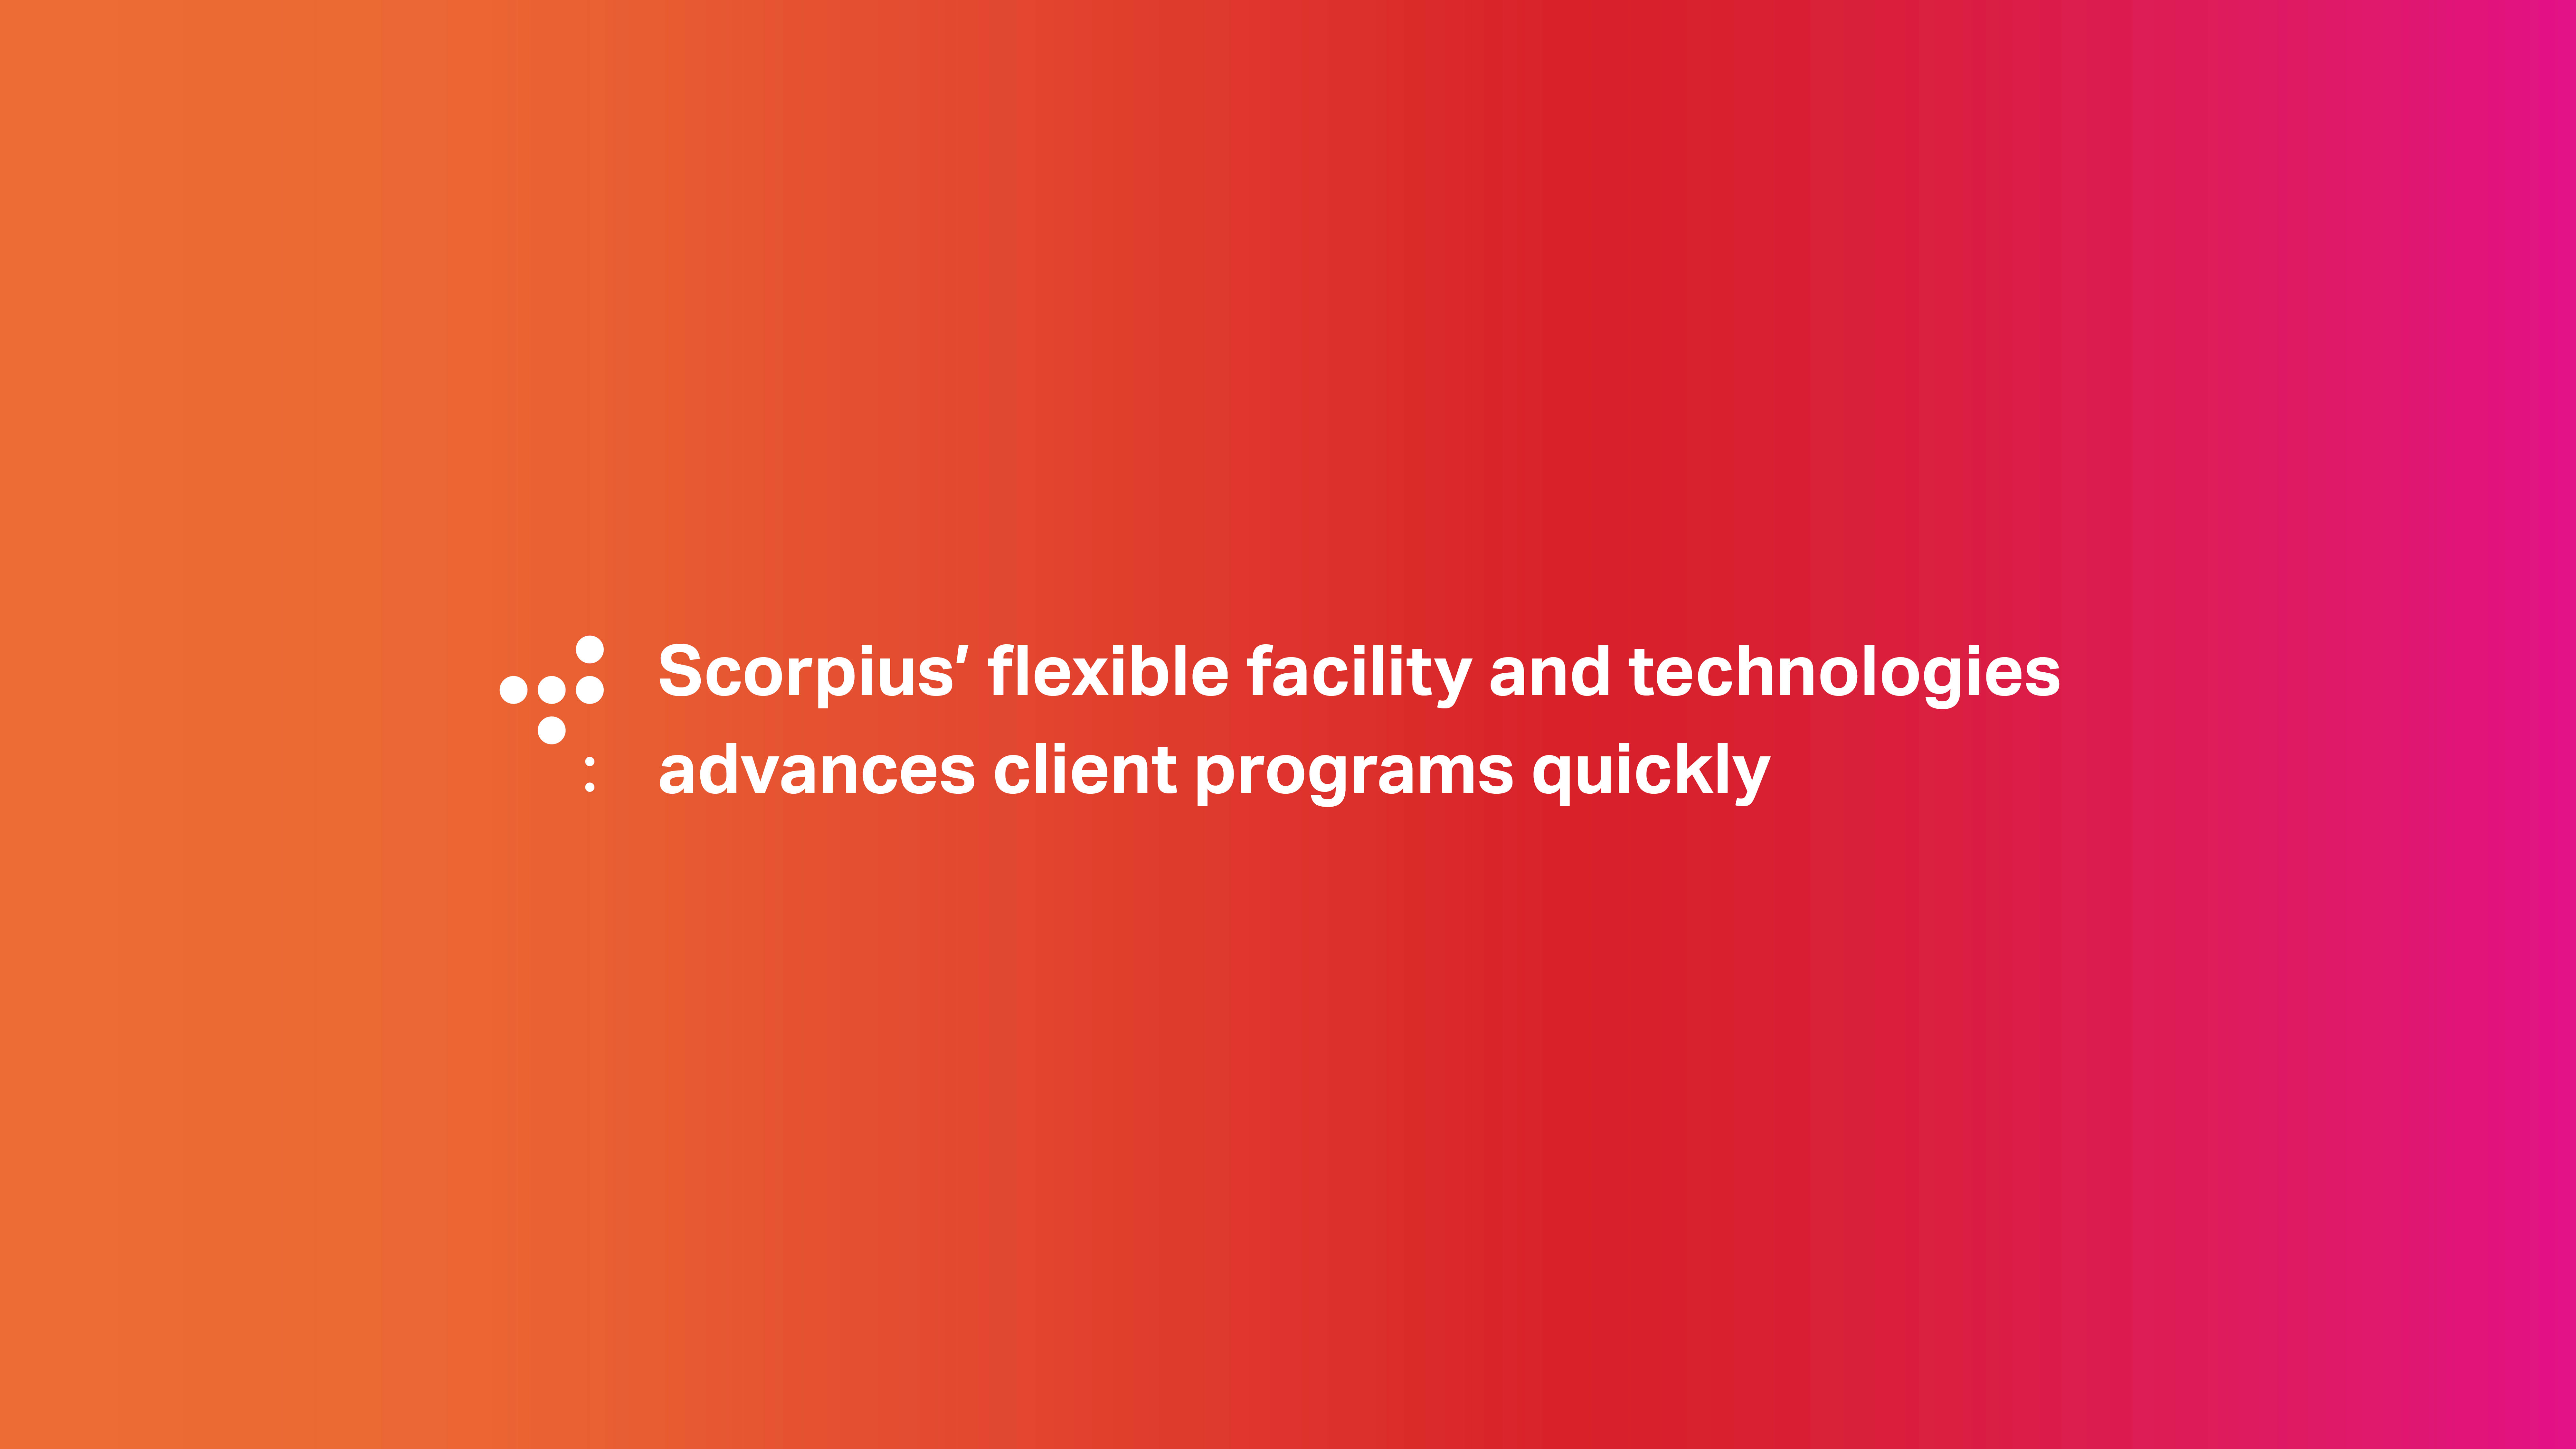 Scorpius' flexible facility and technologies advance client programs quickly